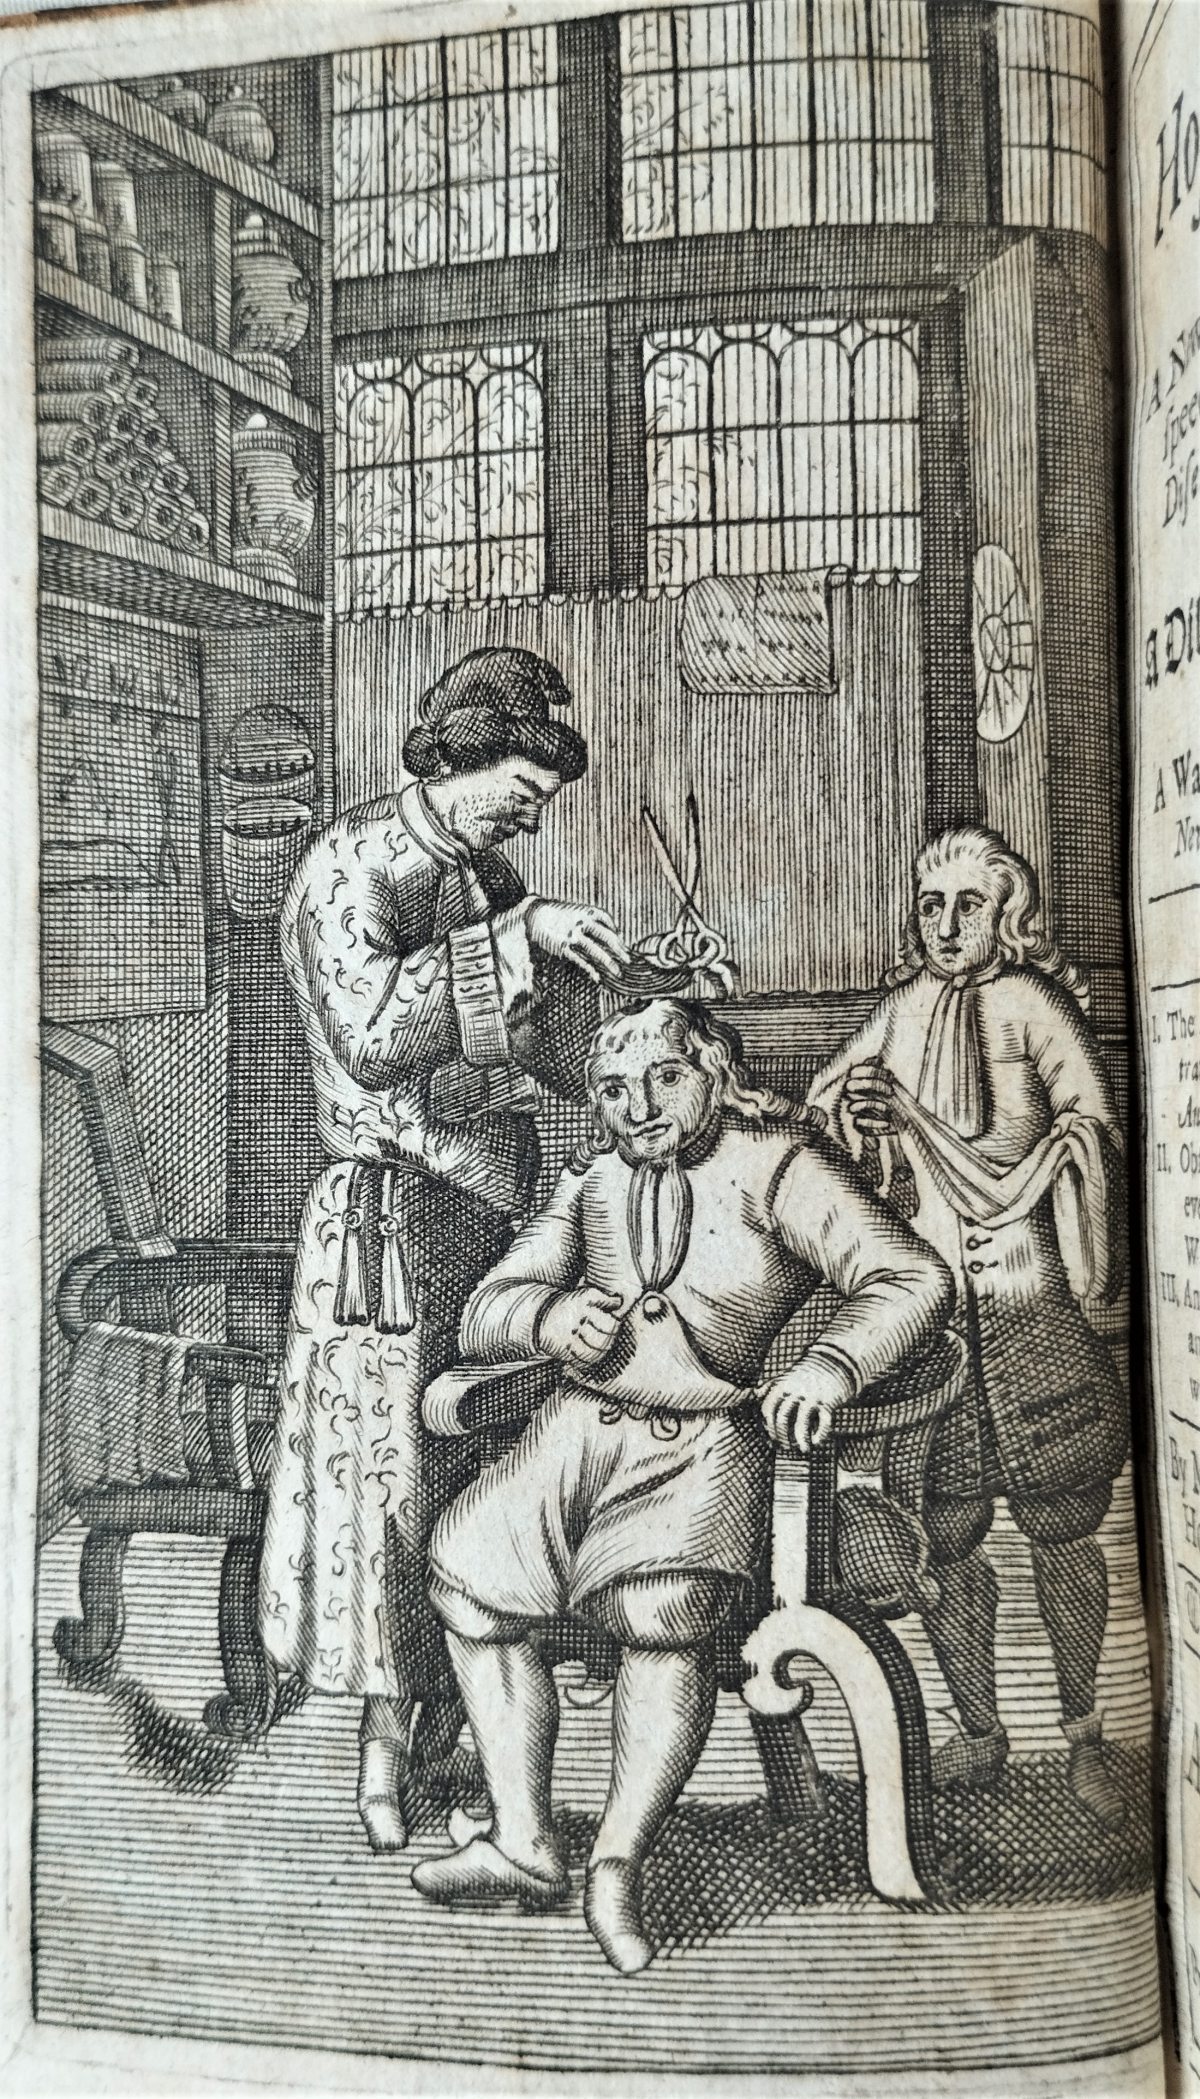 Black and white illustration. Two men attend to a patient seated on a chair whose head has been trepanned. The doctor is about to cover the hole, he holds scissors in one hand and a lead sheet in the other.